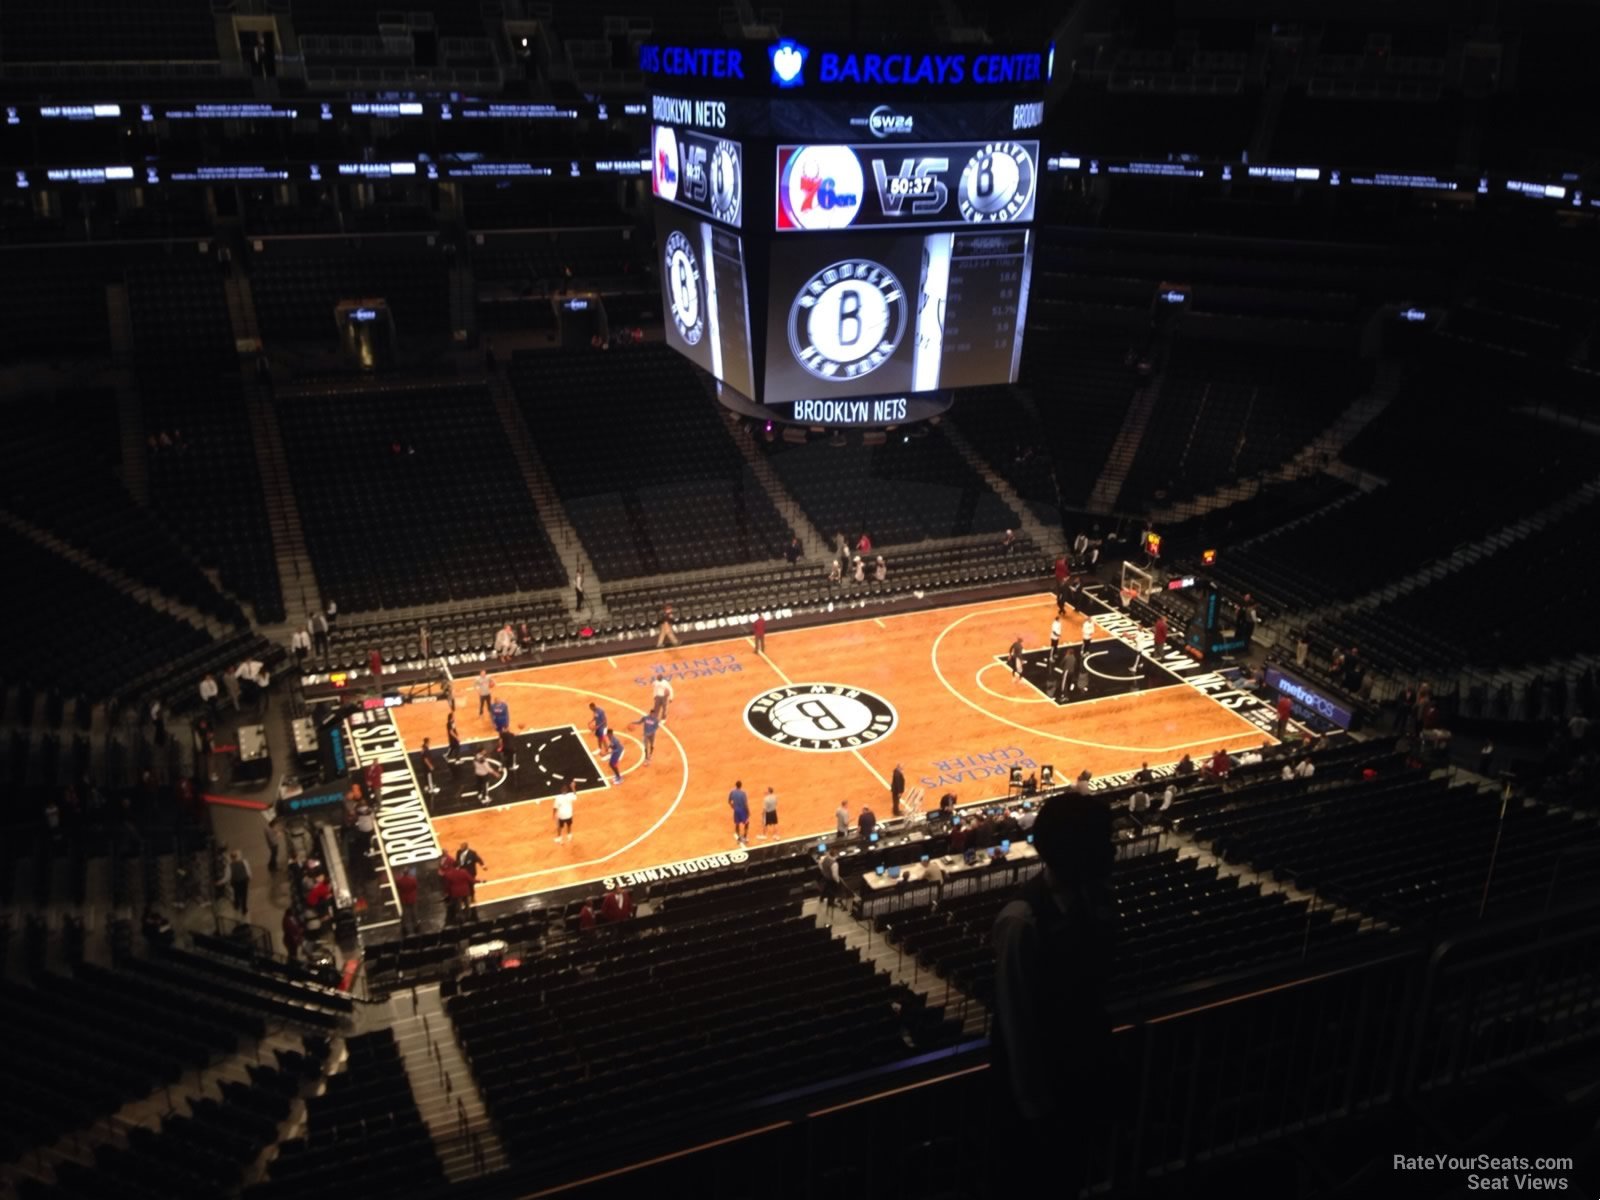 section 210, row 7 seat view  for basketball - barclays center